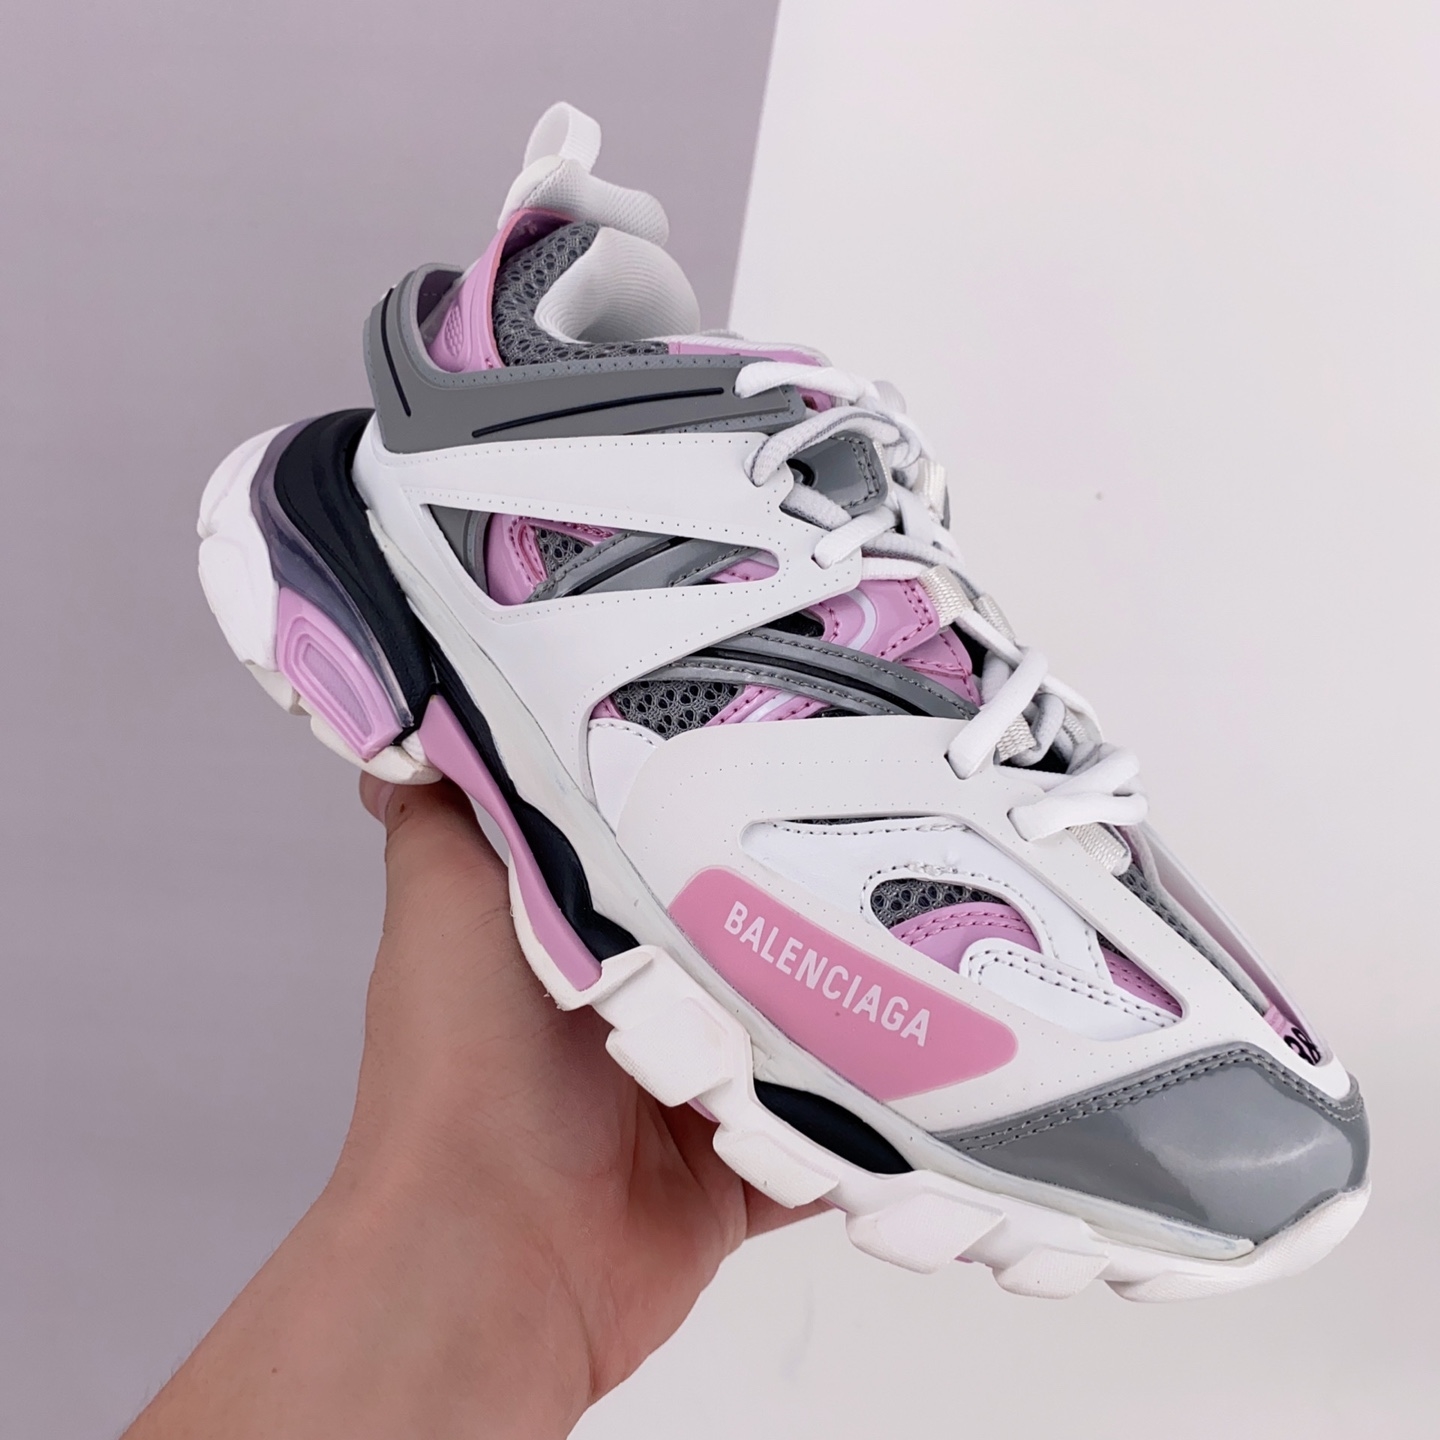 Balenciaga Track White Rose Pink Grey 542023W2FS99041 - Stylish and Versatile Sneakers